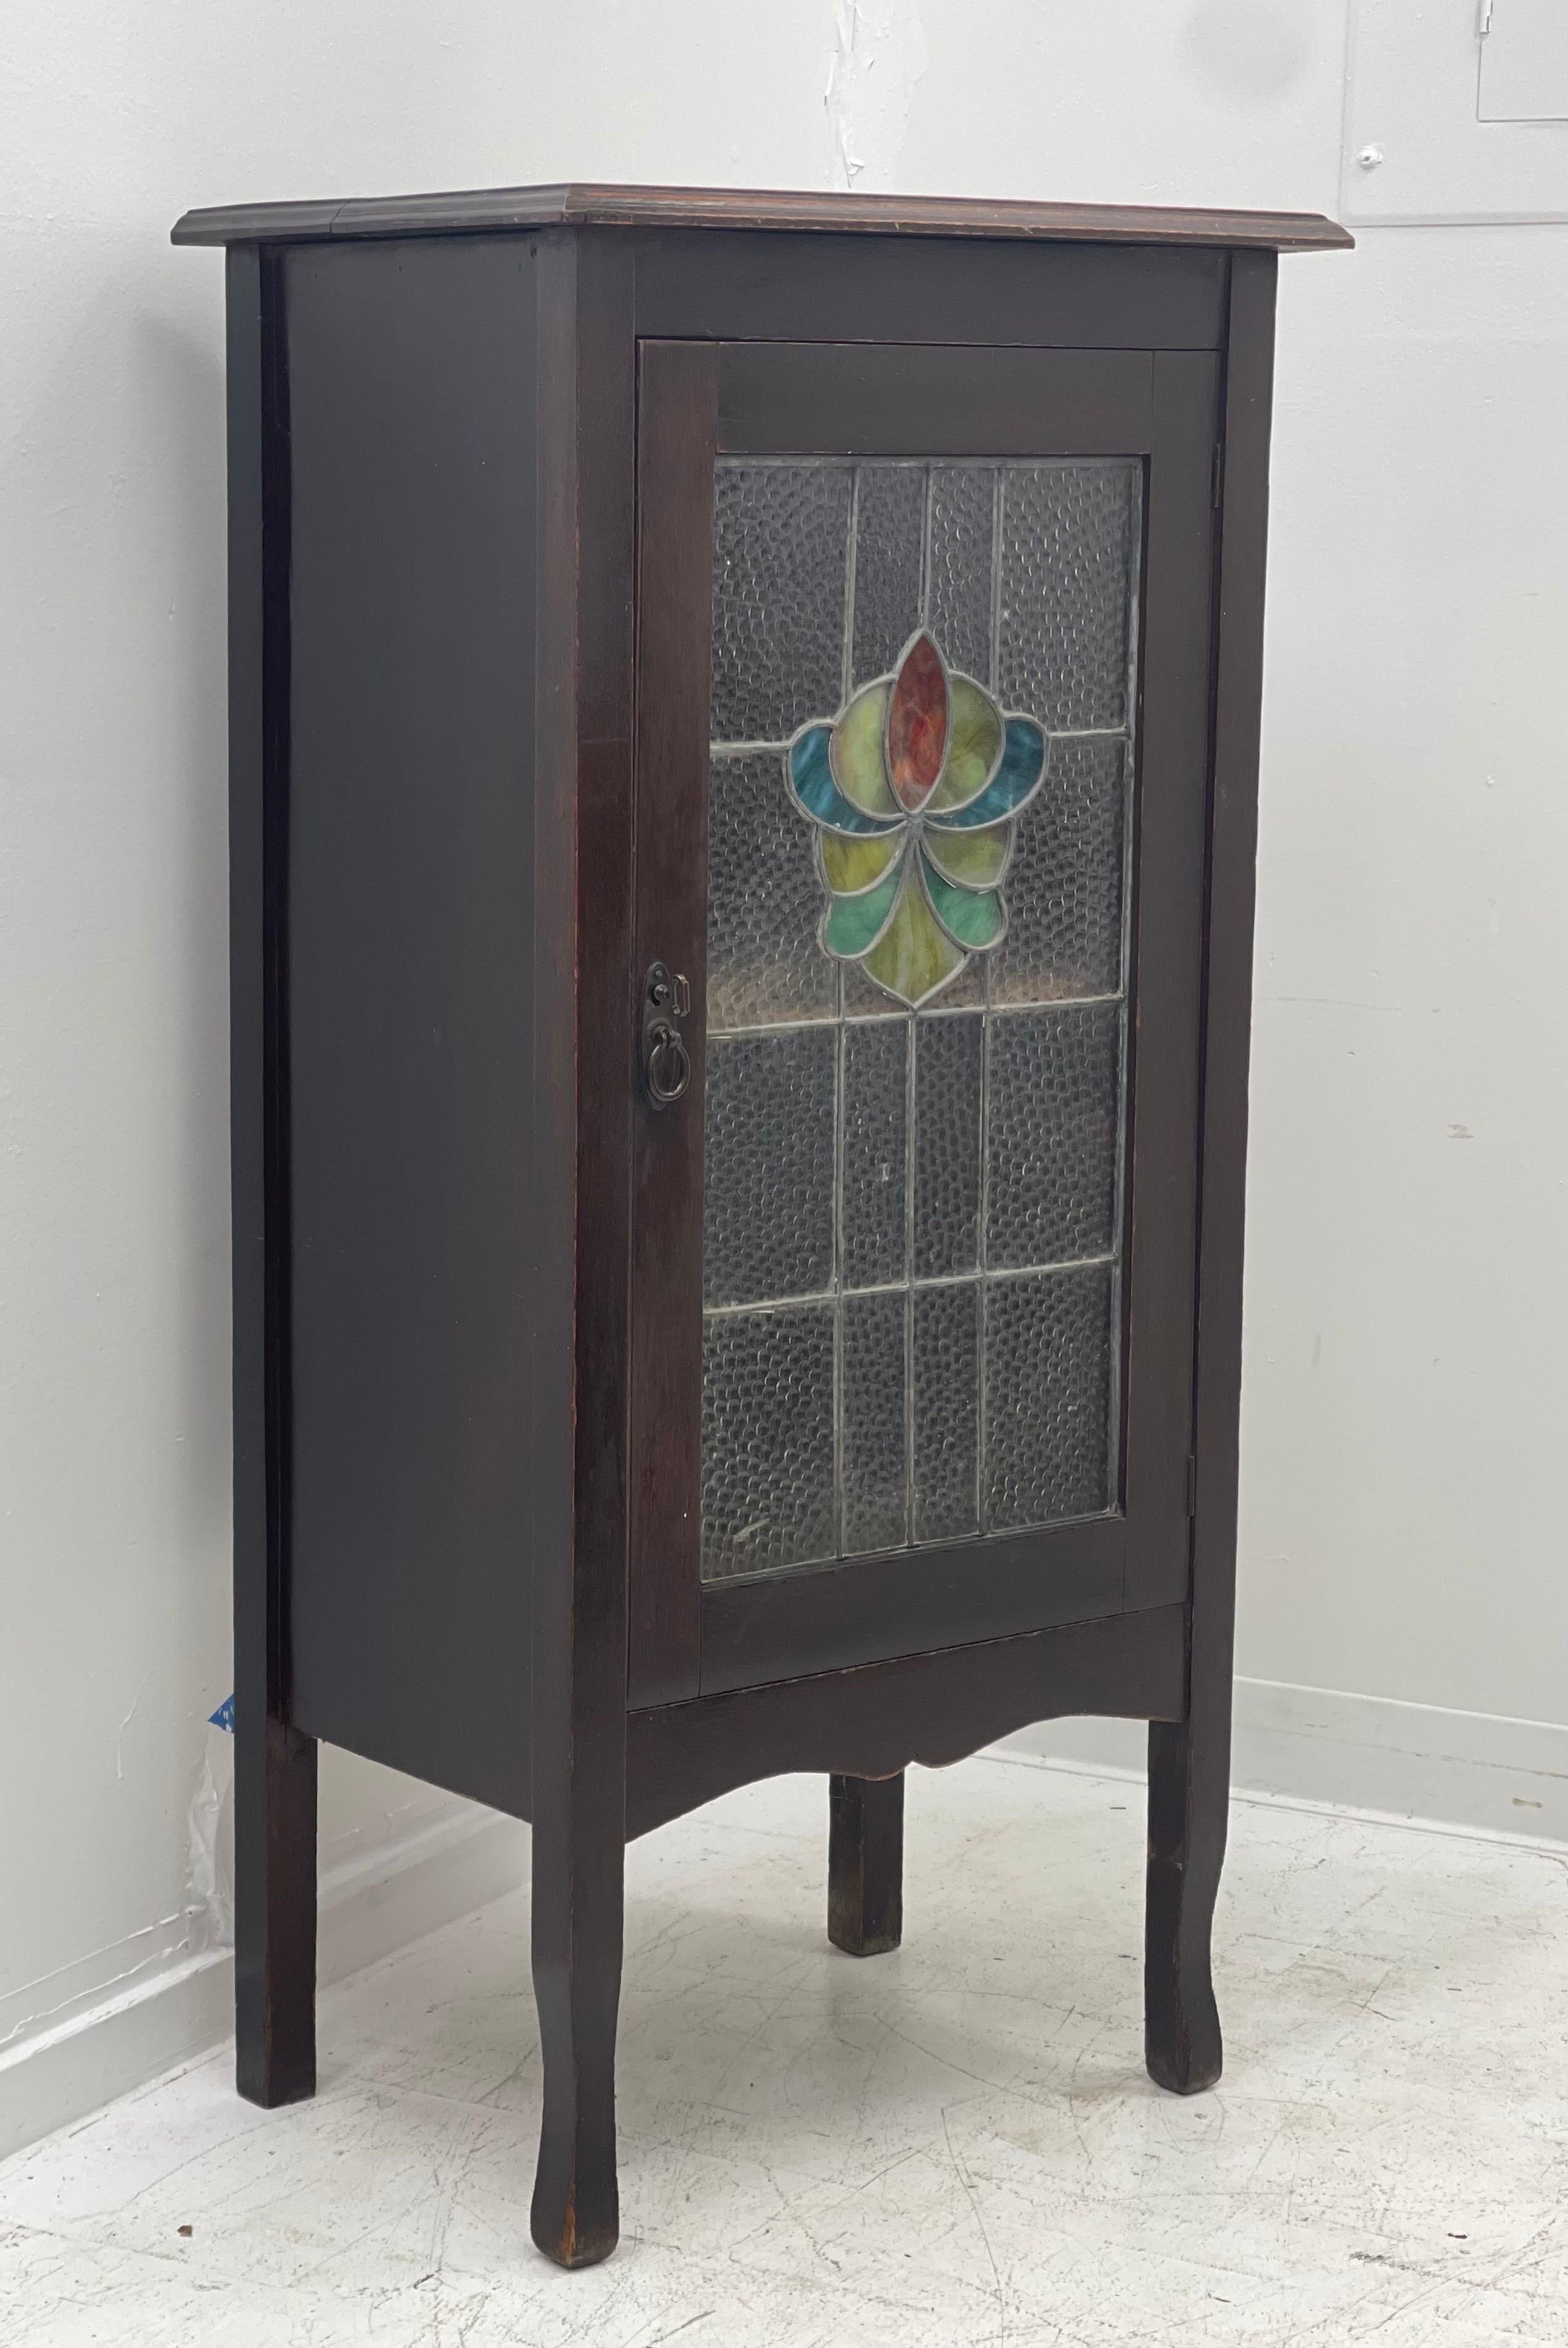 Antique English Walnut Storage Cabinet or Entryway Bookcase Shelf Stained Glass In Good Condition For Sale In Seattle, WA